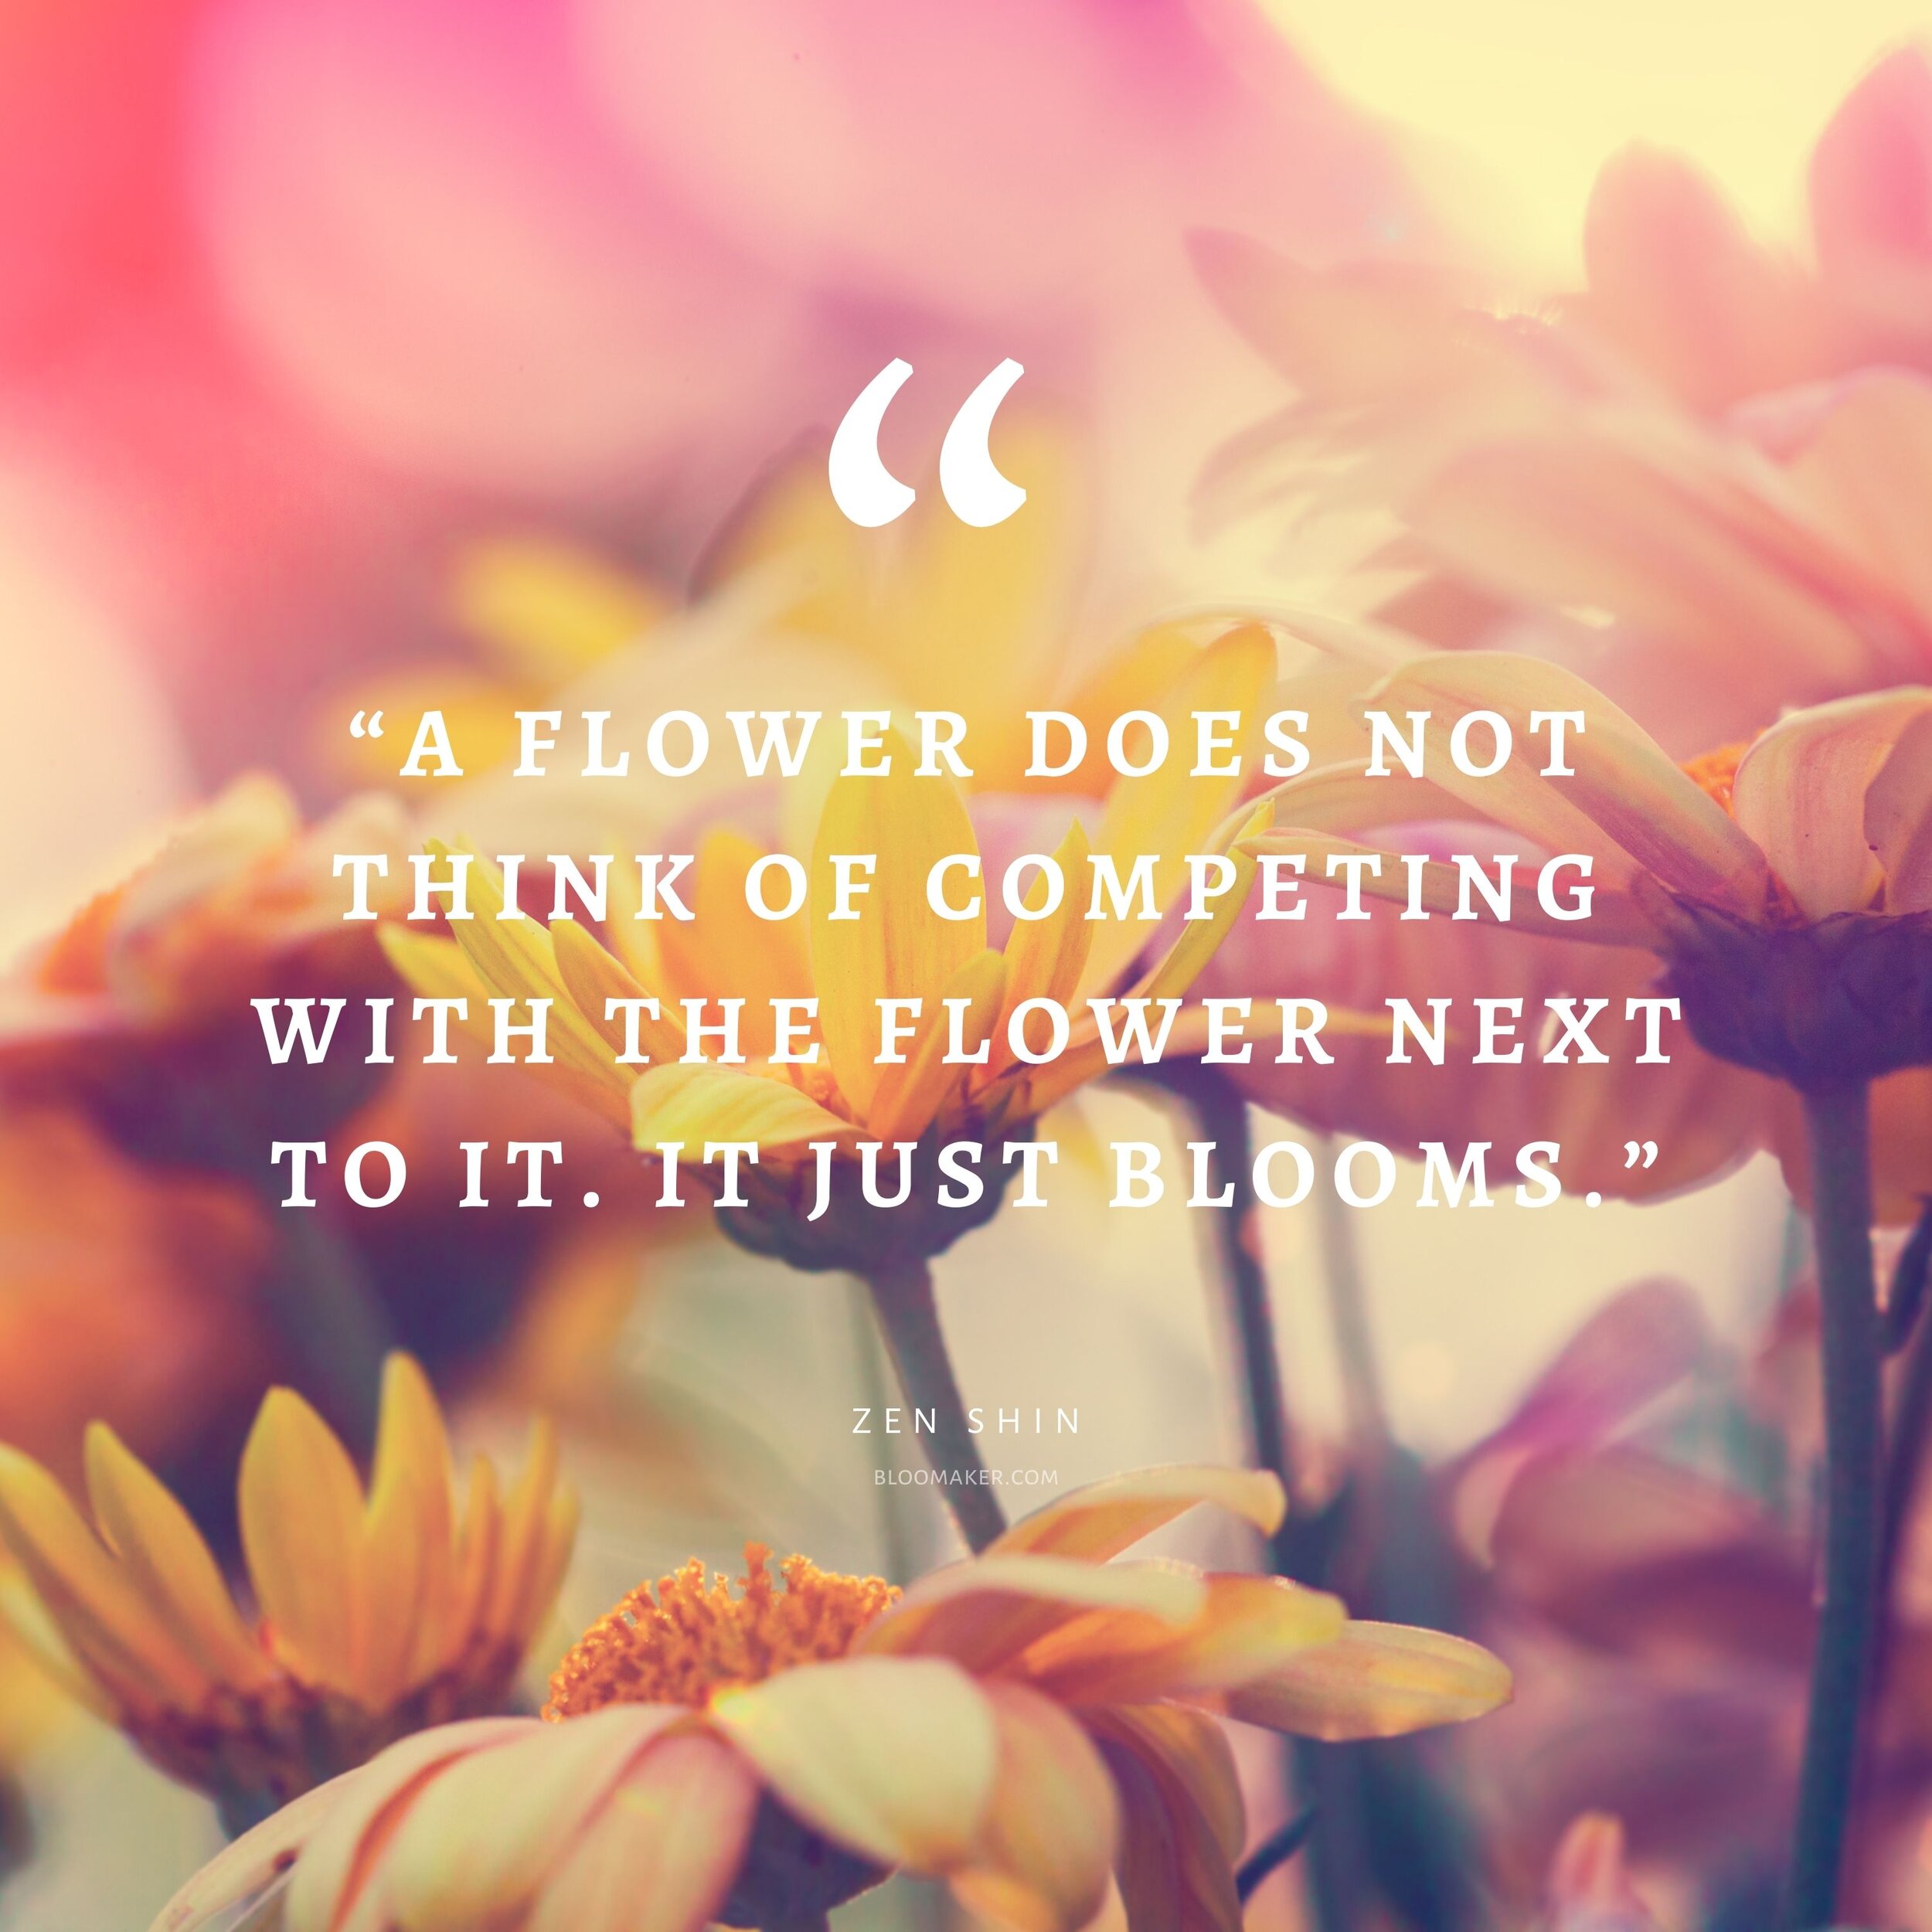 55 Inspirational Flower Quotes - Beautiful Motivational Sayings with ...